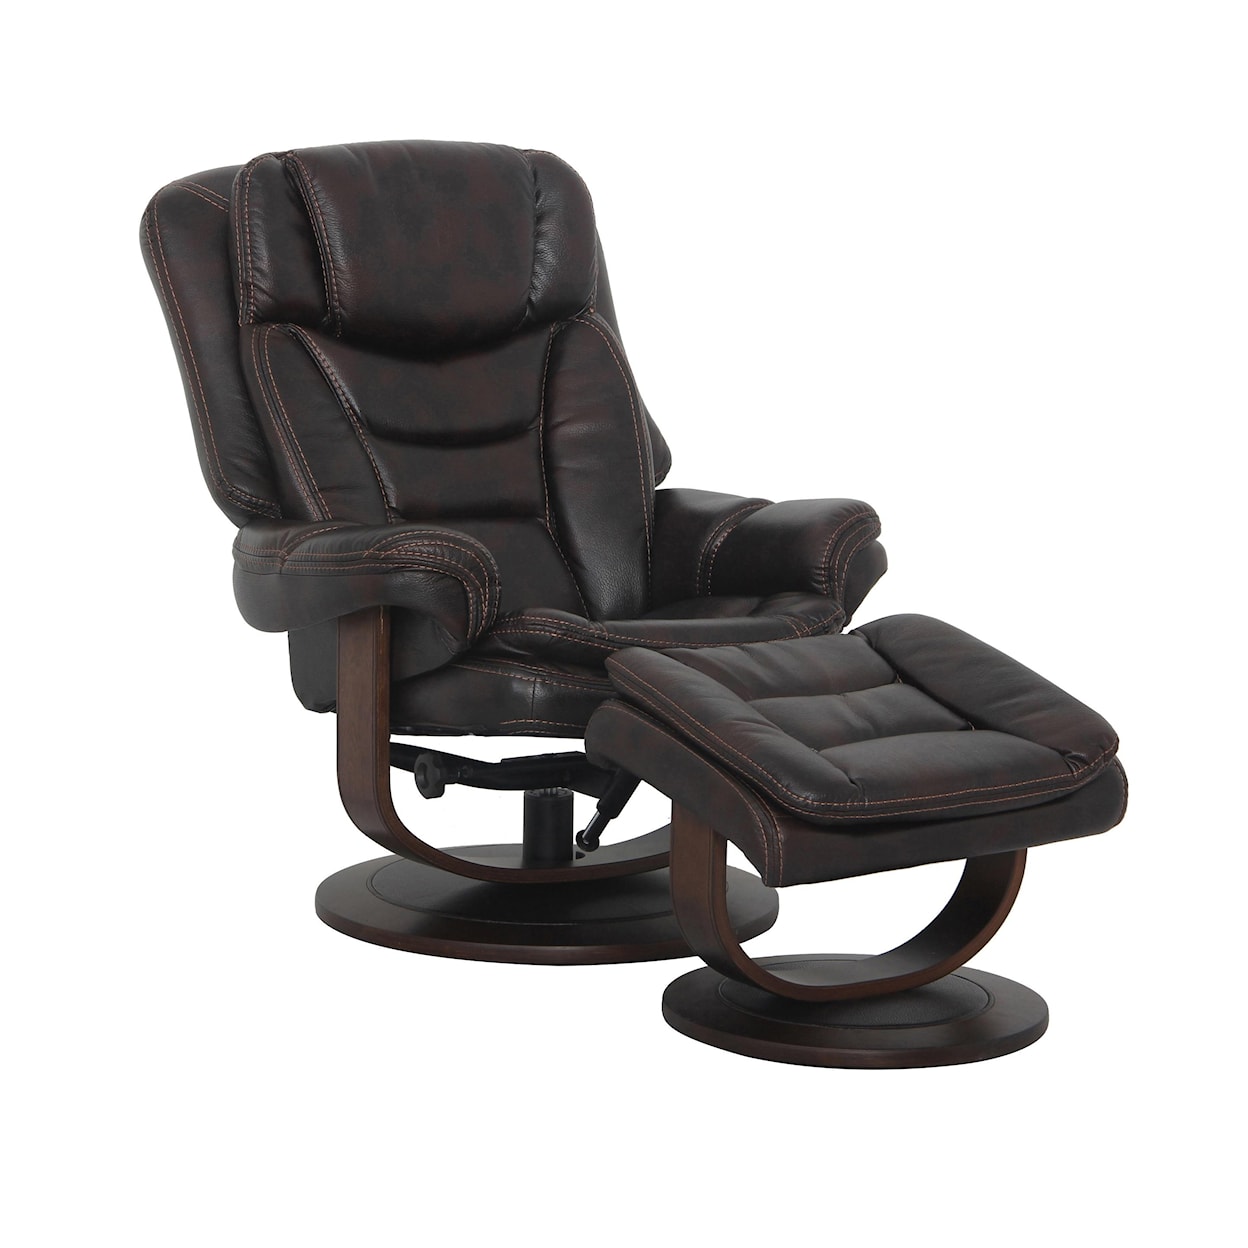 VFM Signature K812 Contemporary Reclining Chair and Ottoman